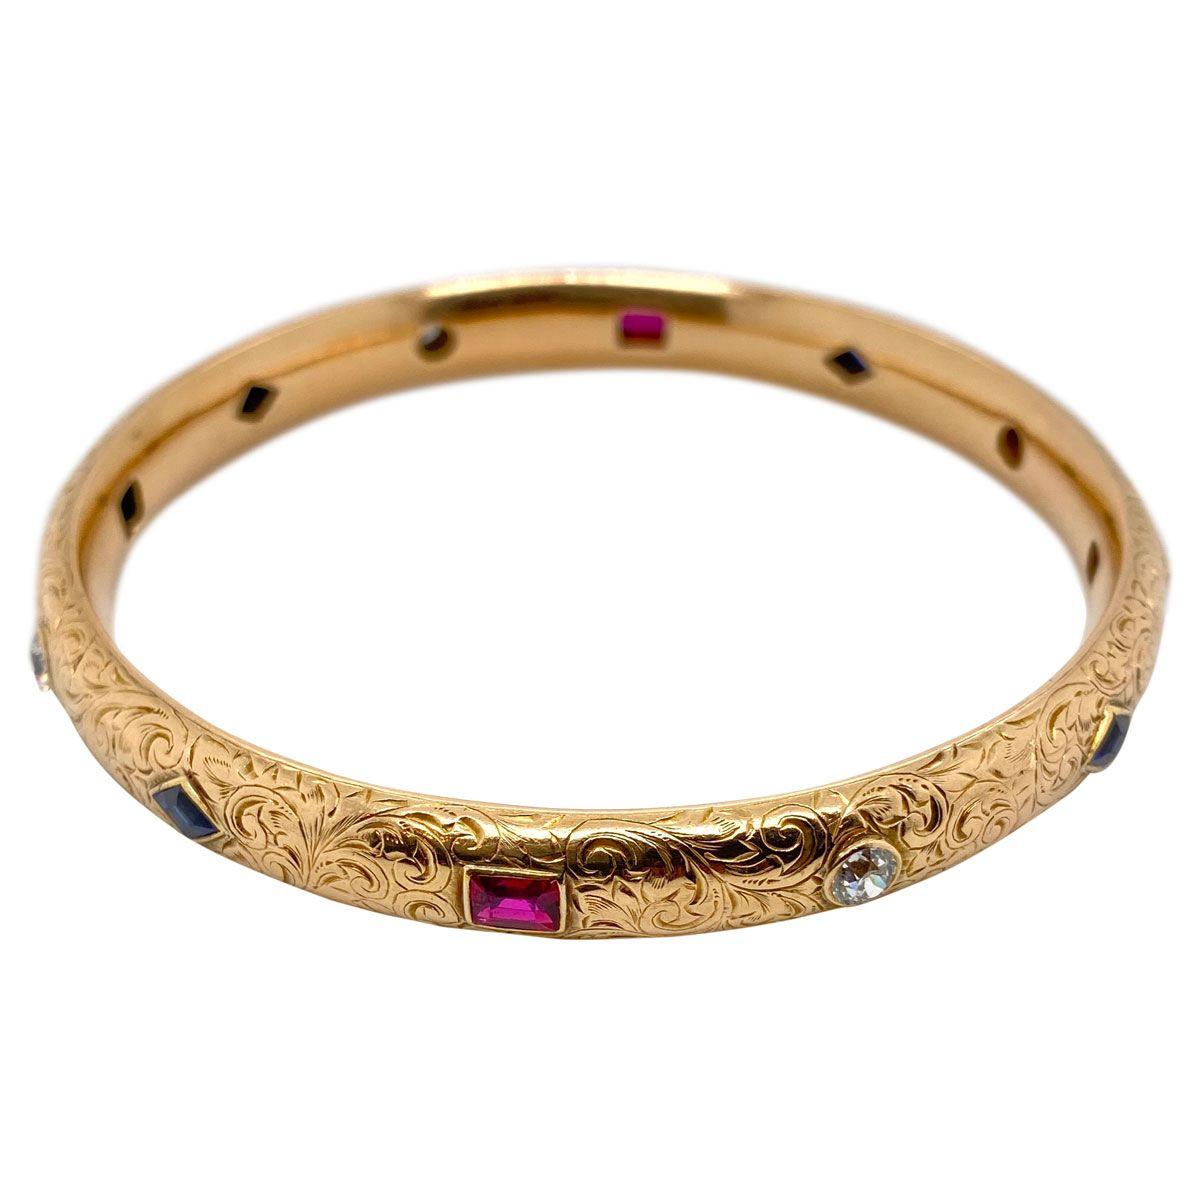 This bangle is just divine - as soon as I saw it it was love at first sight. Such a great style to be worn separately or stacked with other bangles and bracelets. Finely crafted from 18k yellow gold, this hand engraved bangle also features bezel set